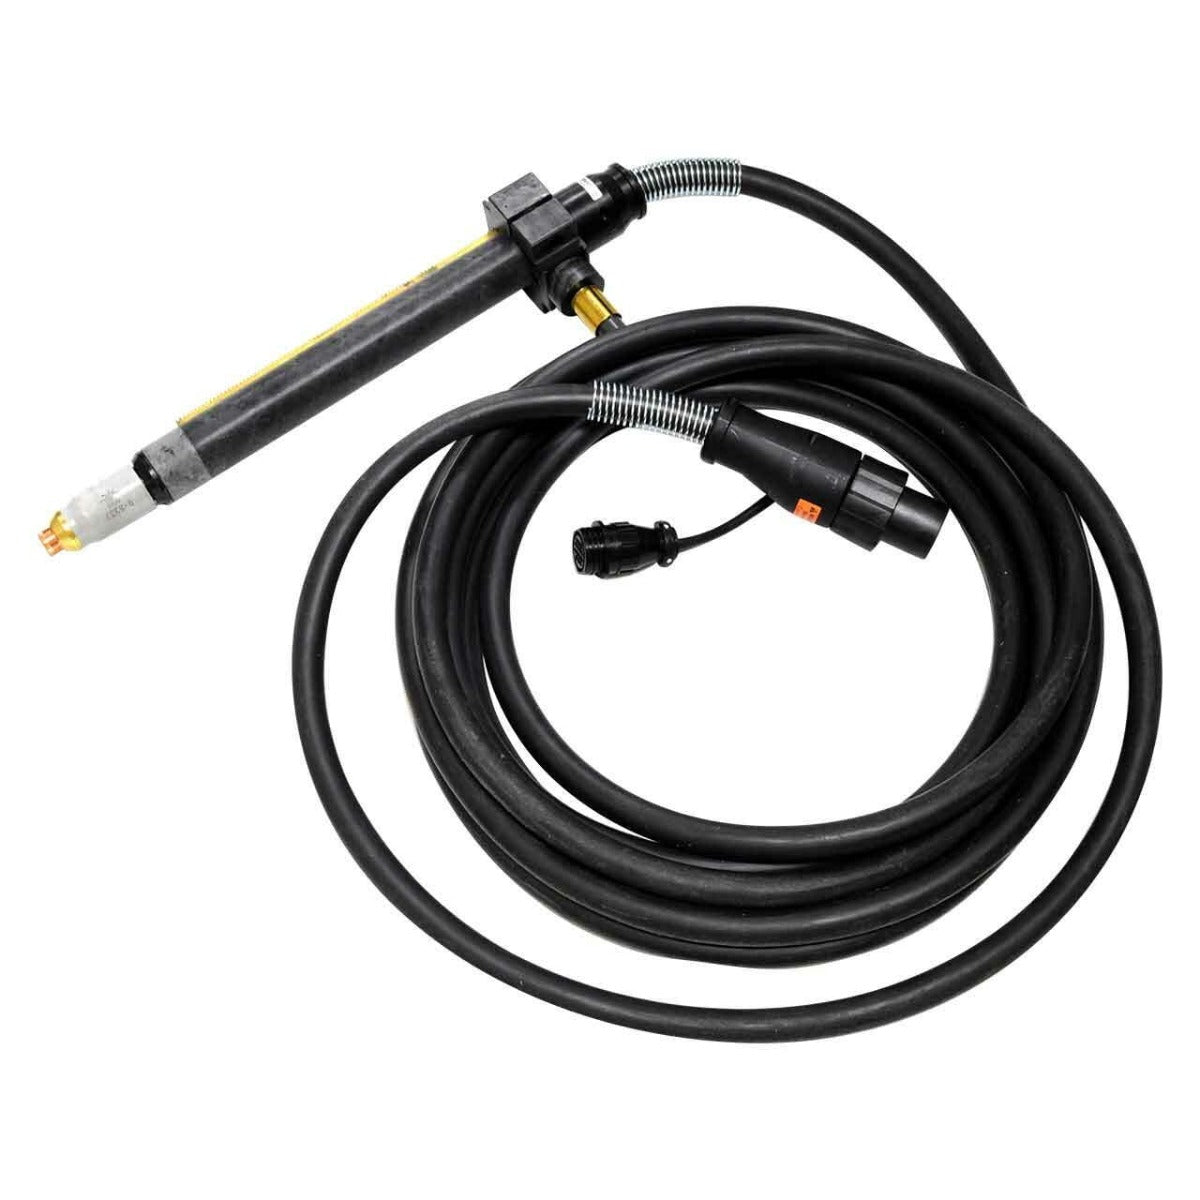 Thermal Dynamics SL100, 25 Ft Plasma Torch With Lead, 180 Degree Head (7-5215)